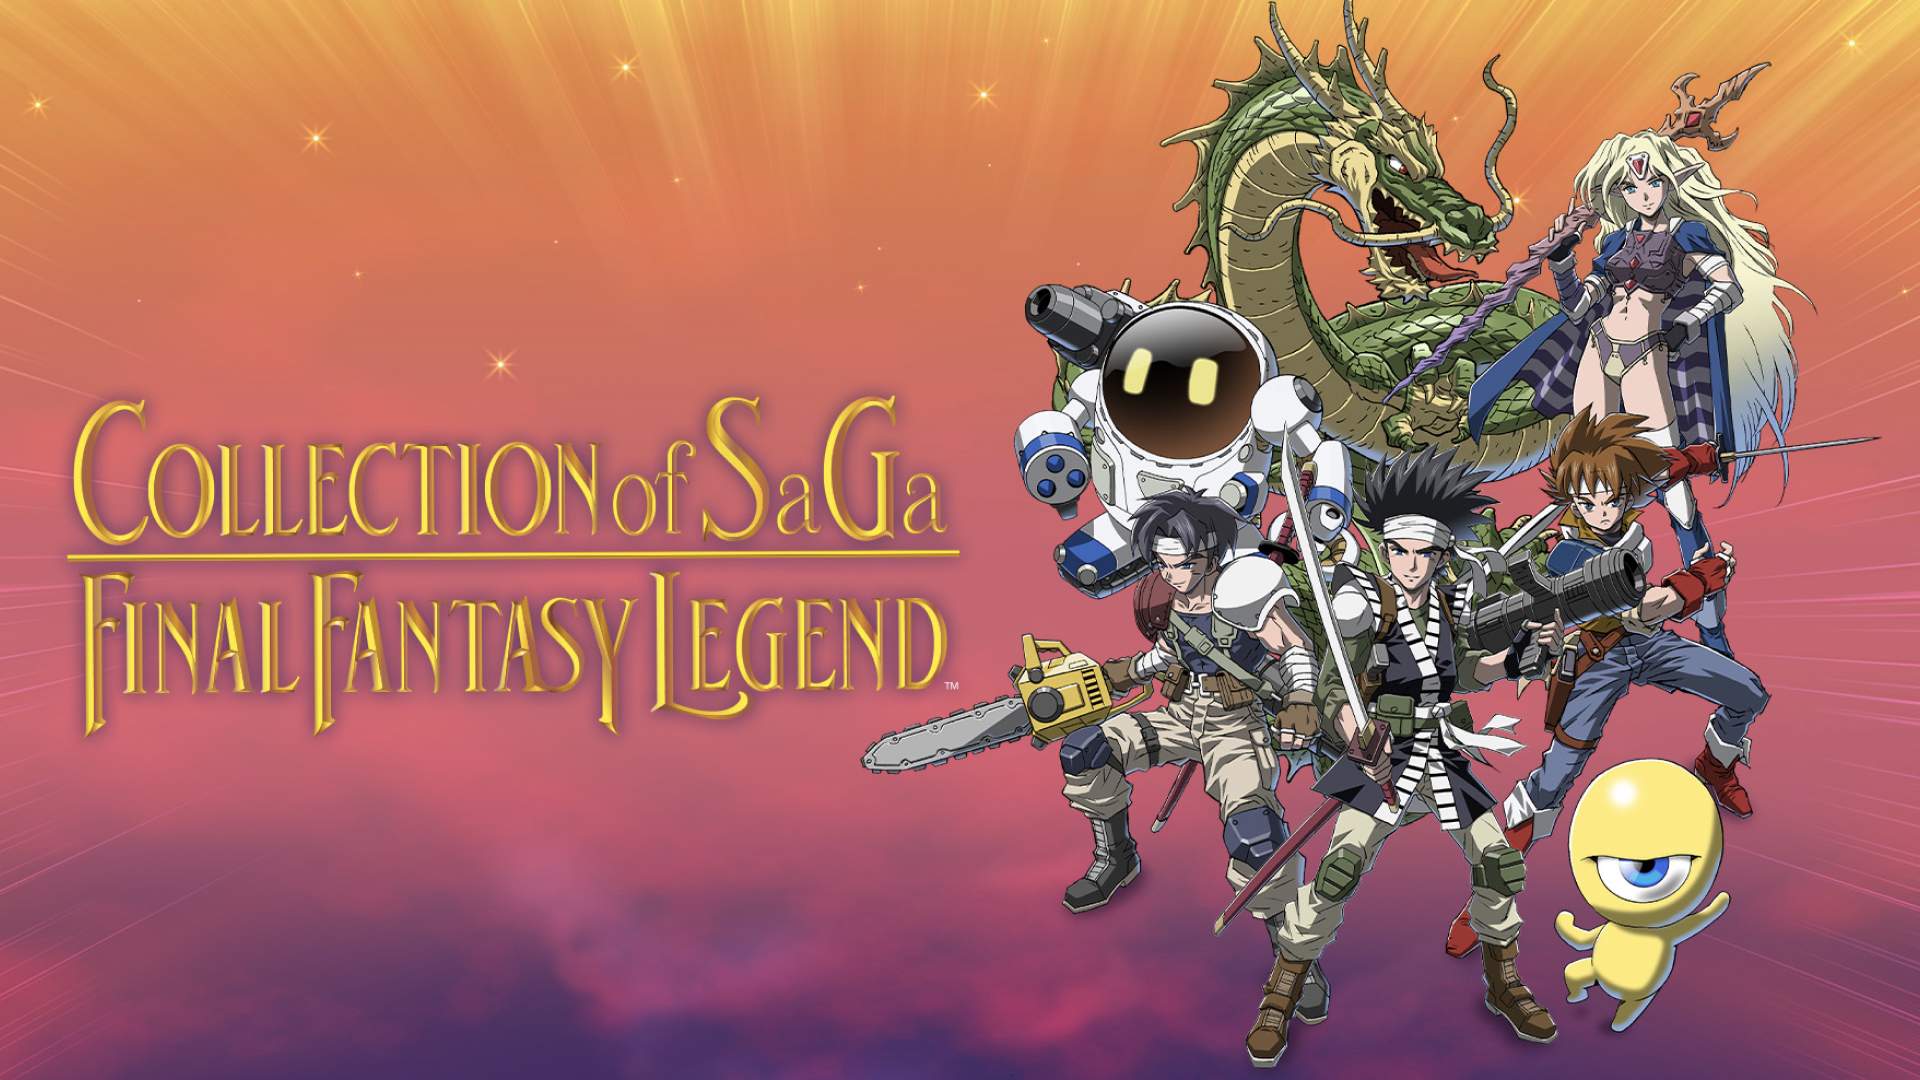 What's great about COLLECTION of SaGa FINAL FANTASY LEGEND?. Square Enix Blog